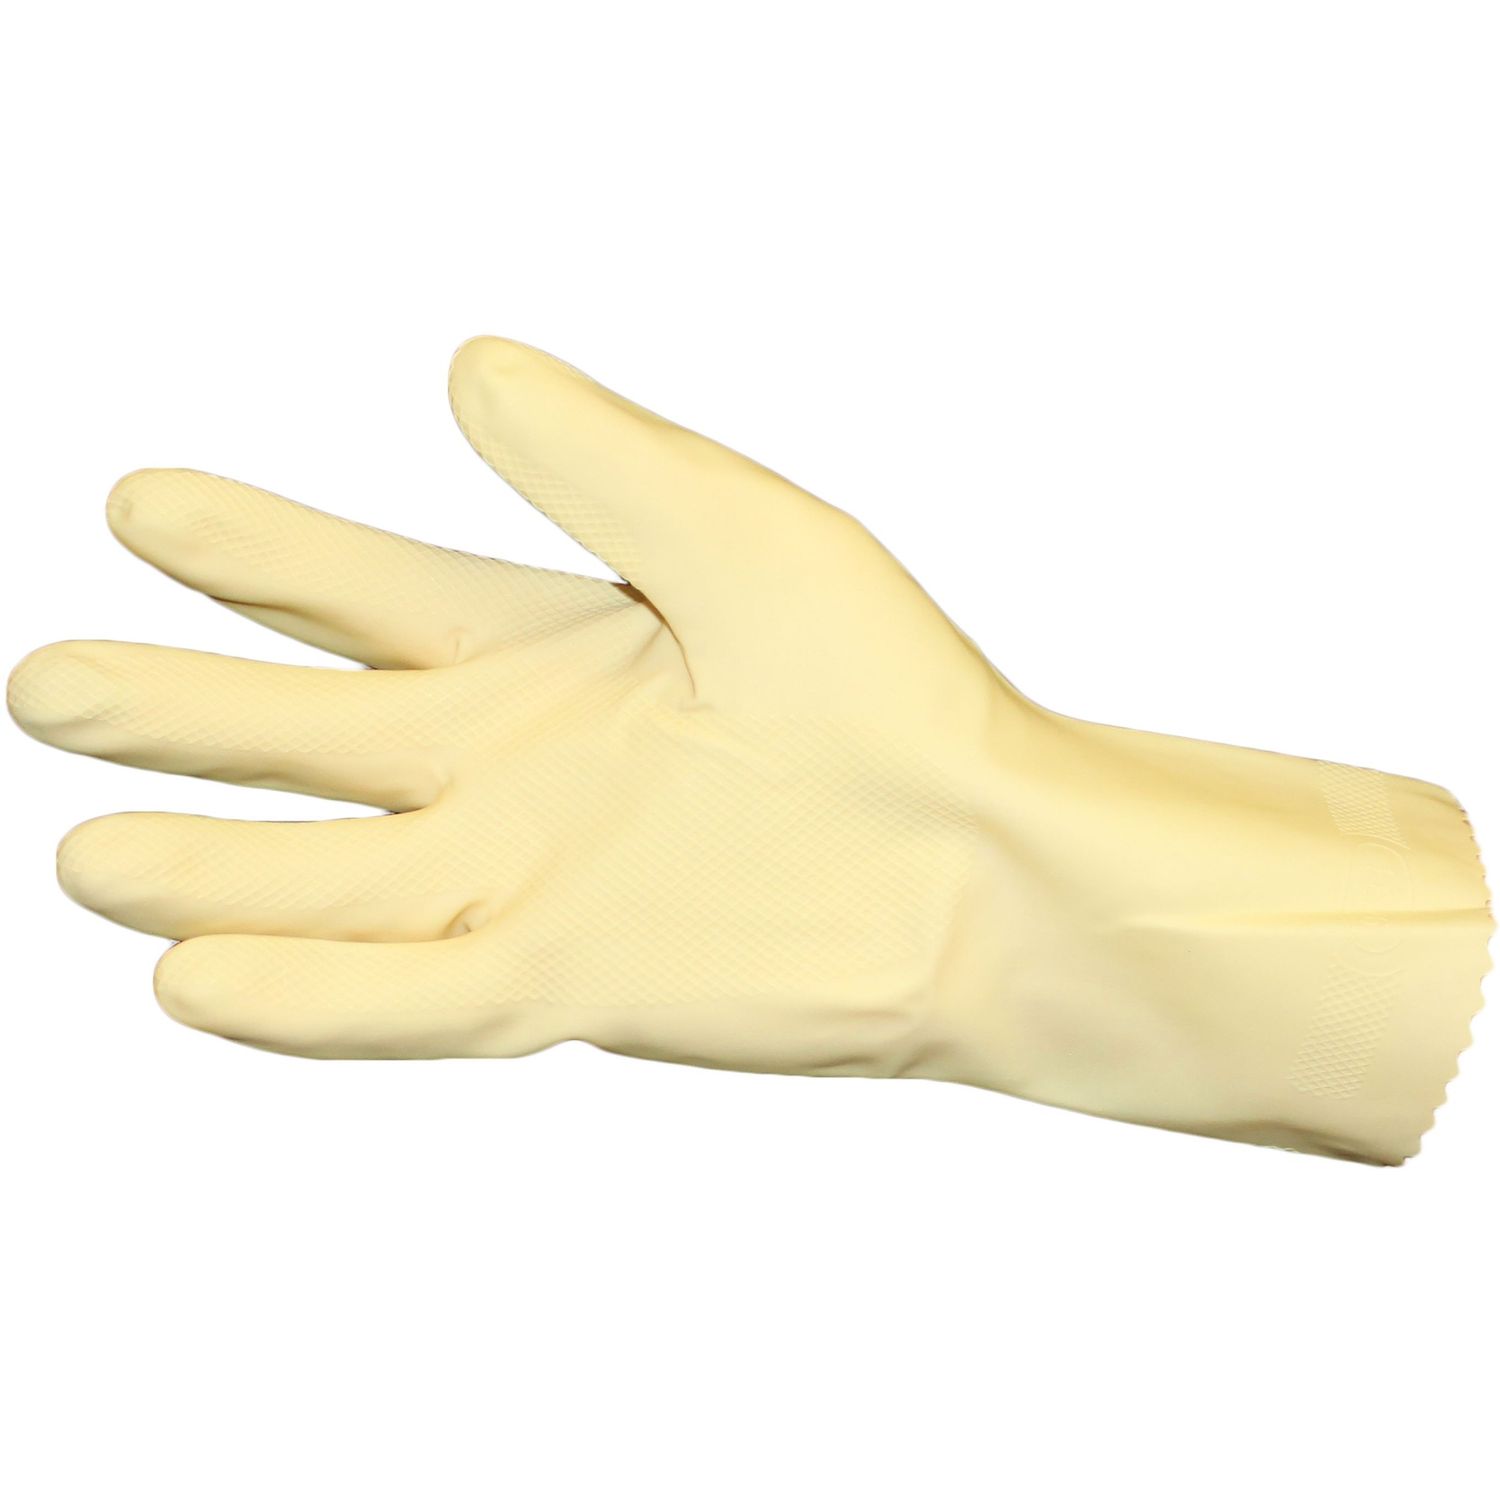 Unlined Latex Reusable Glove Chemical Protection, Medium Size, Latex, Natural